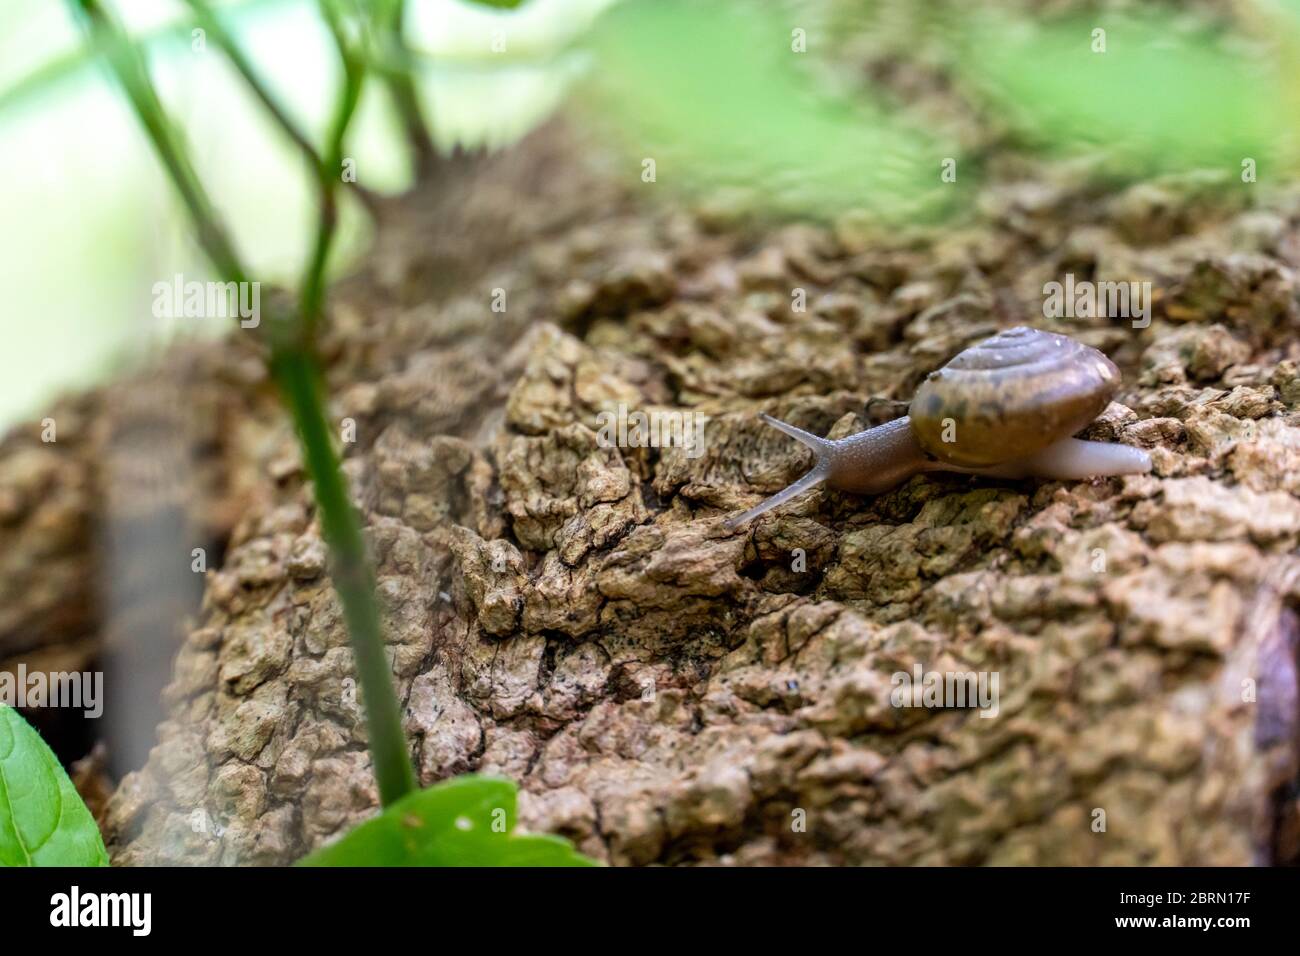 Snail Using Tentacles to Feel the Bark Stock Photo